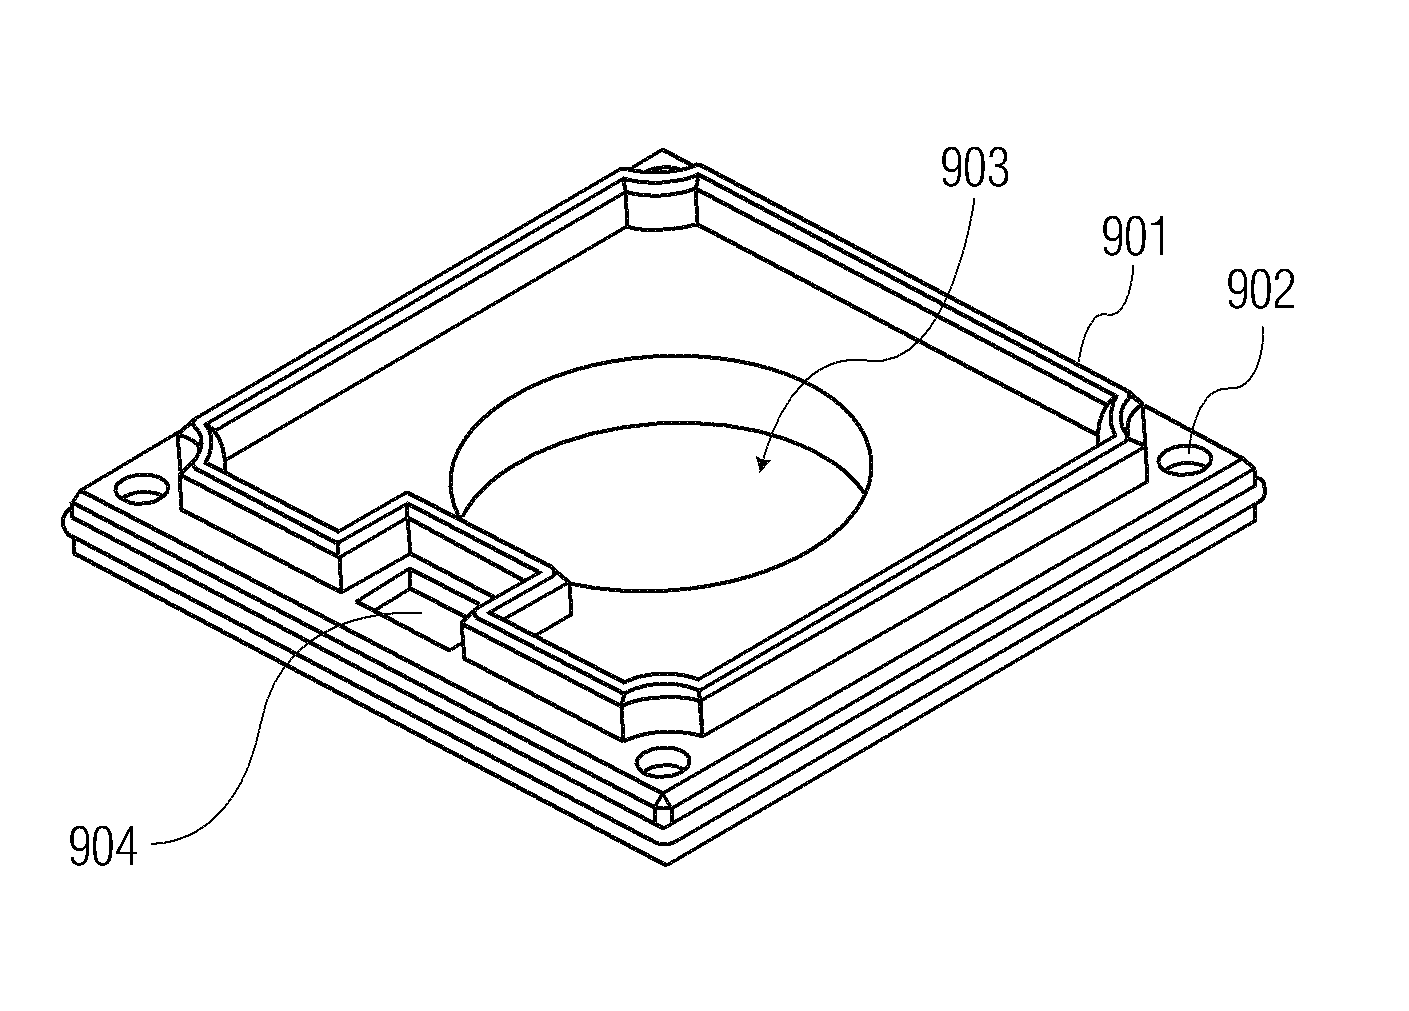 Modular quick-connect a/v system and methods thereof